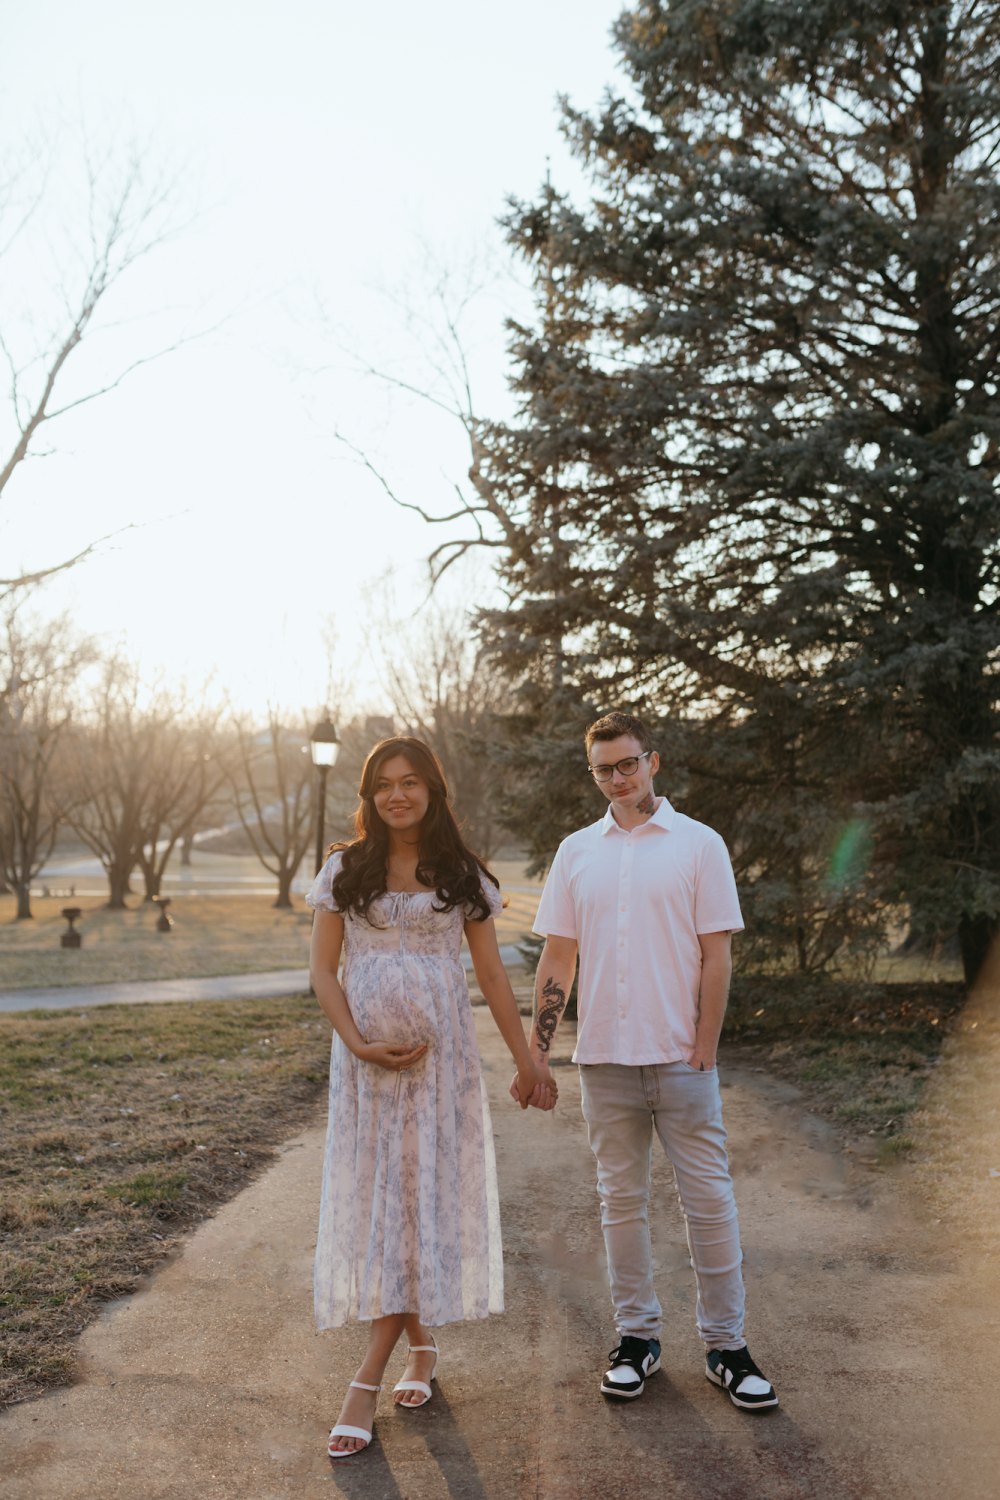 90 Day Fiance couple Sam and Citra are expecting their first child